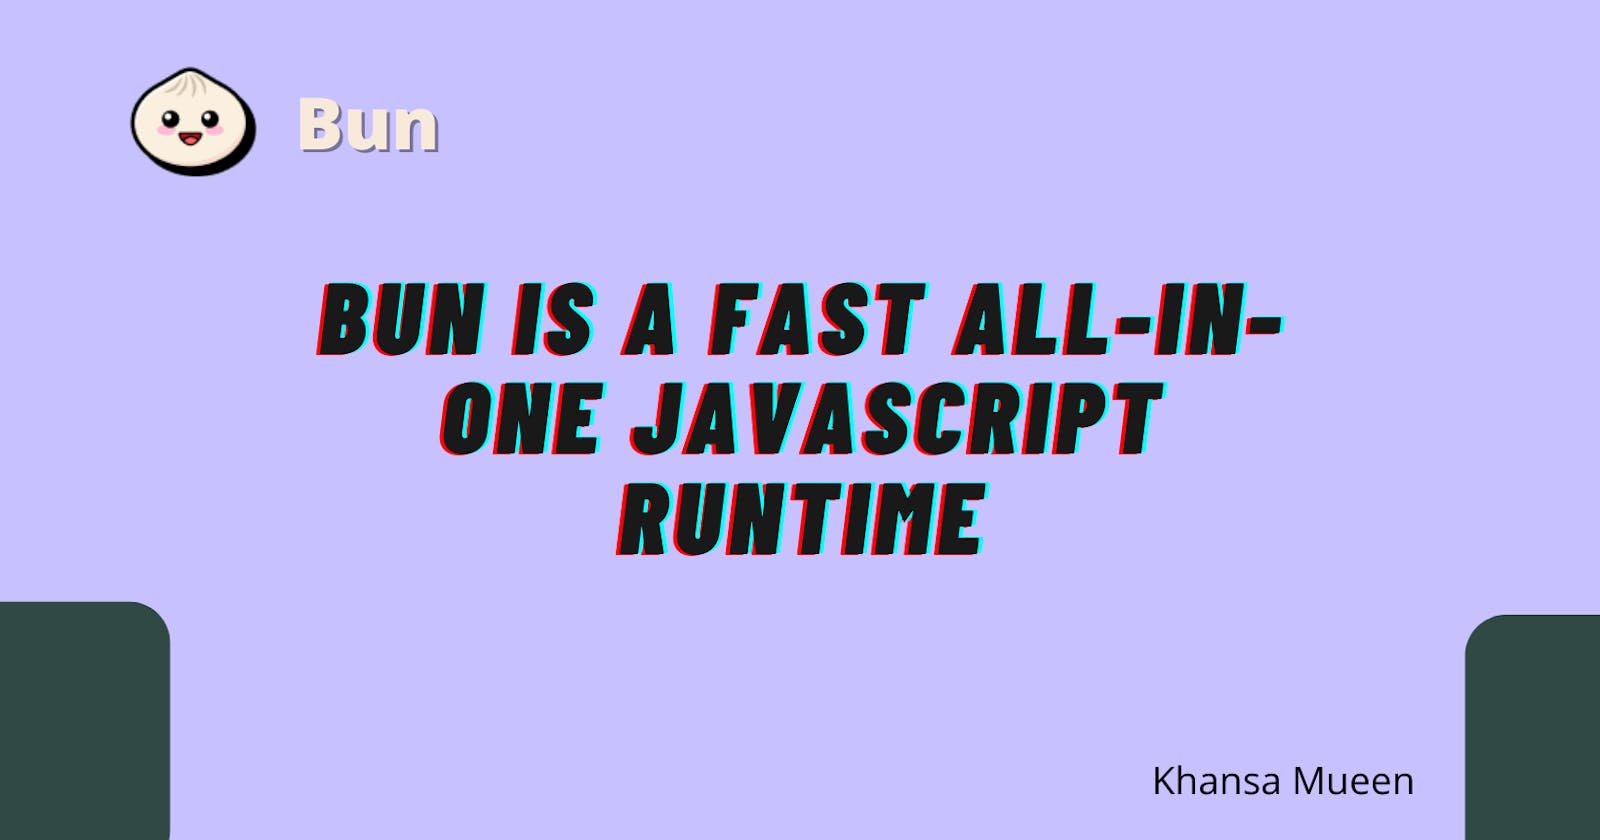 Bun Is A Lightweight All-in-one Javascript Runtime.